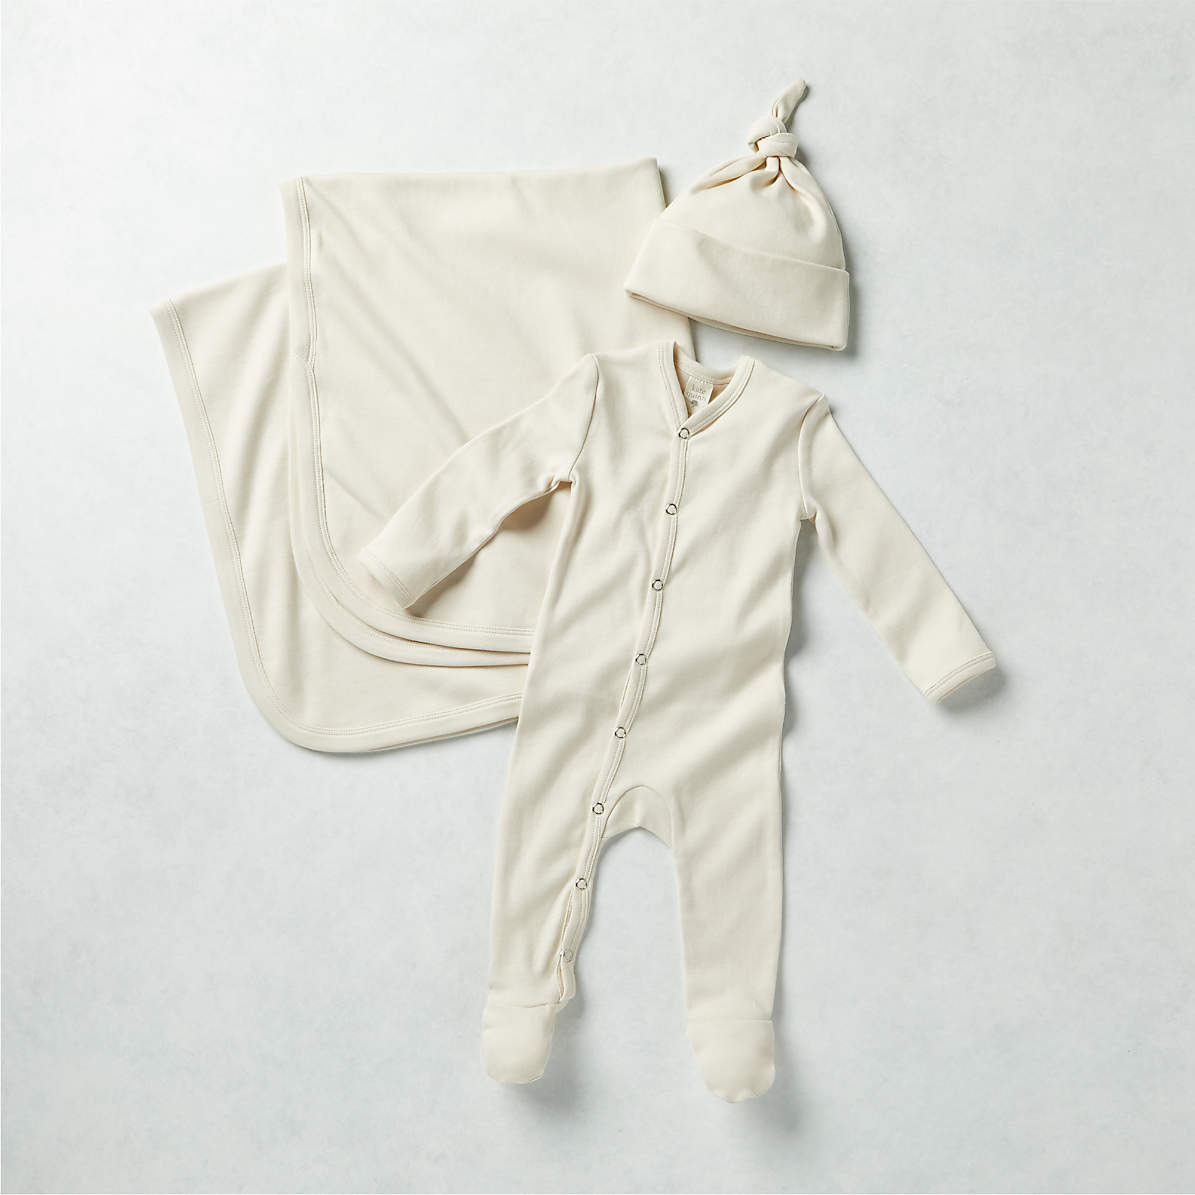 kate quinn baby clothing